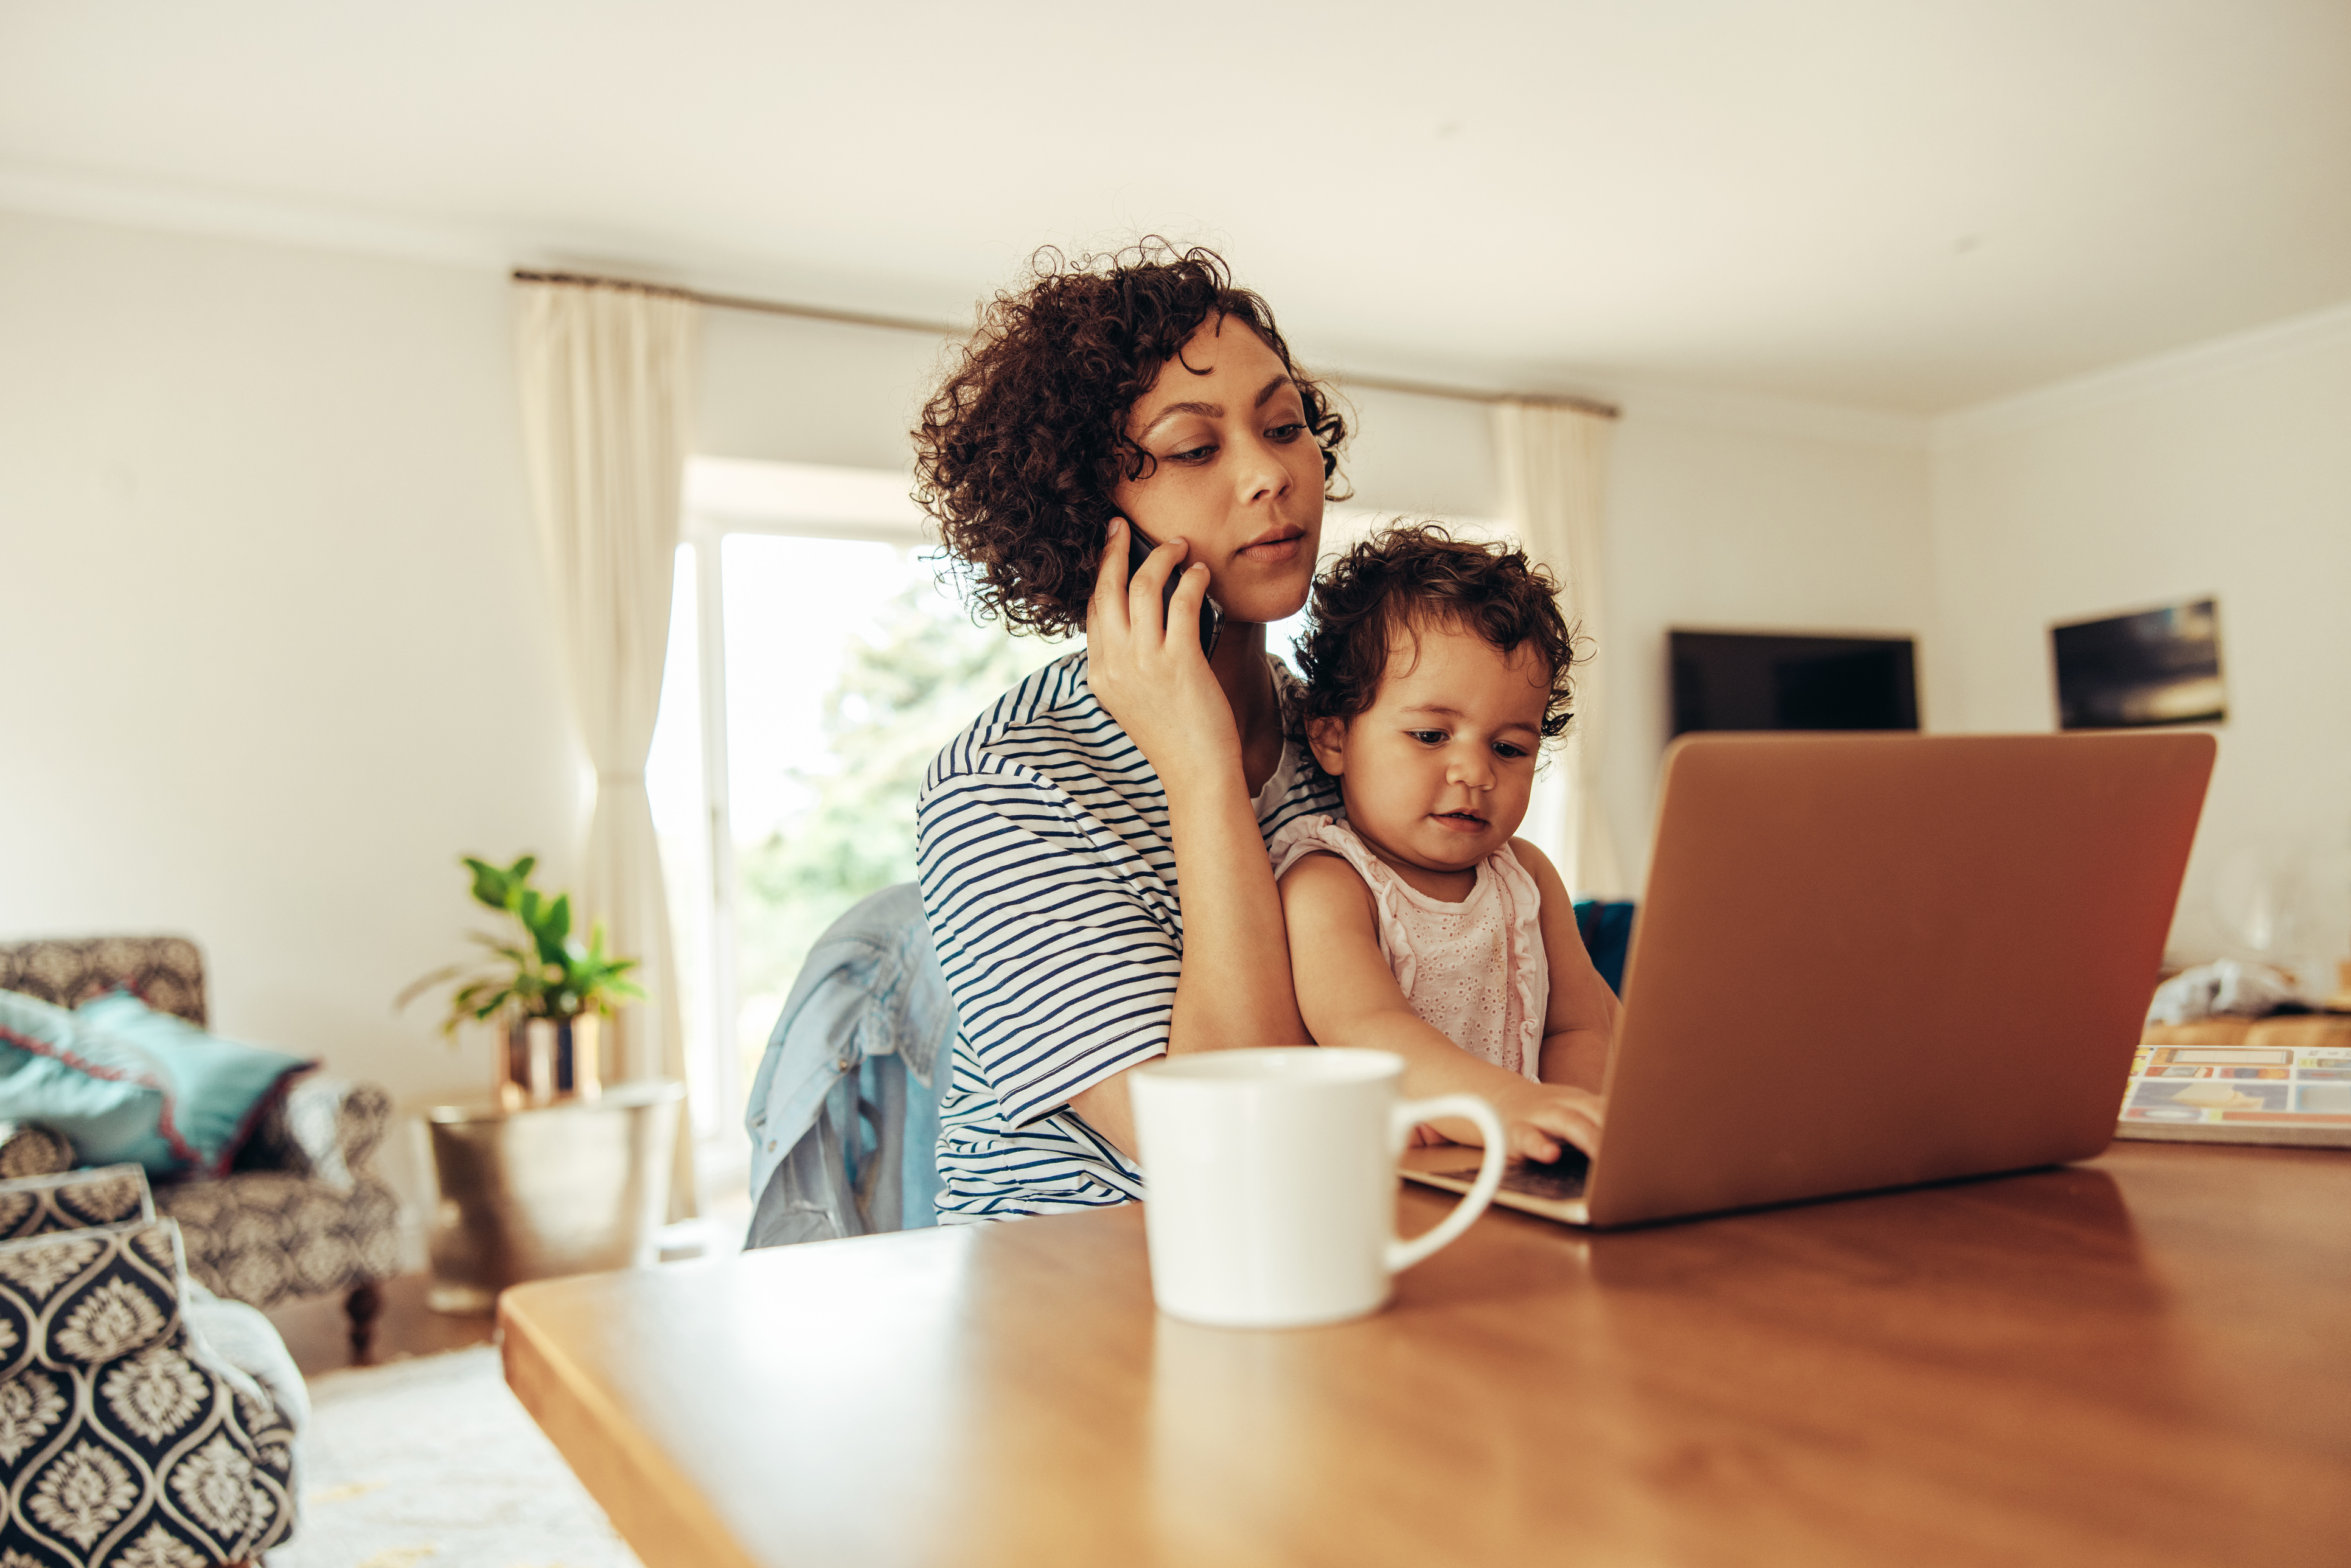 Stock photo of a mother holding a toddler on her lap and sitting in front of the computer while on her cell phone